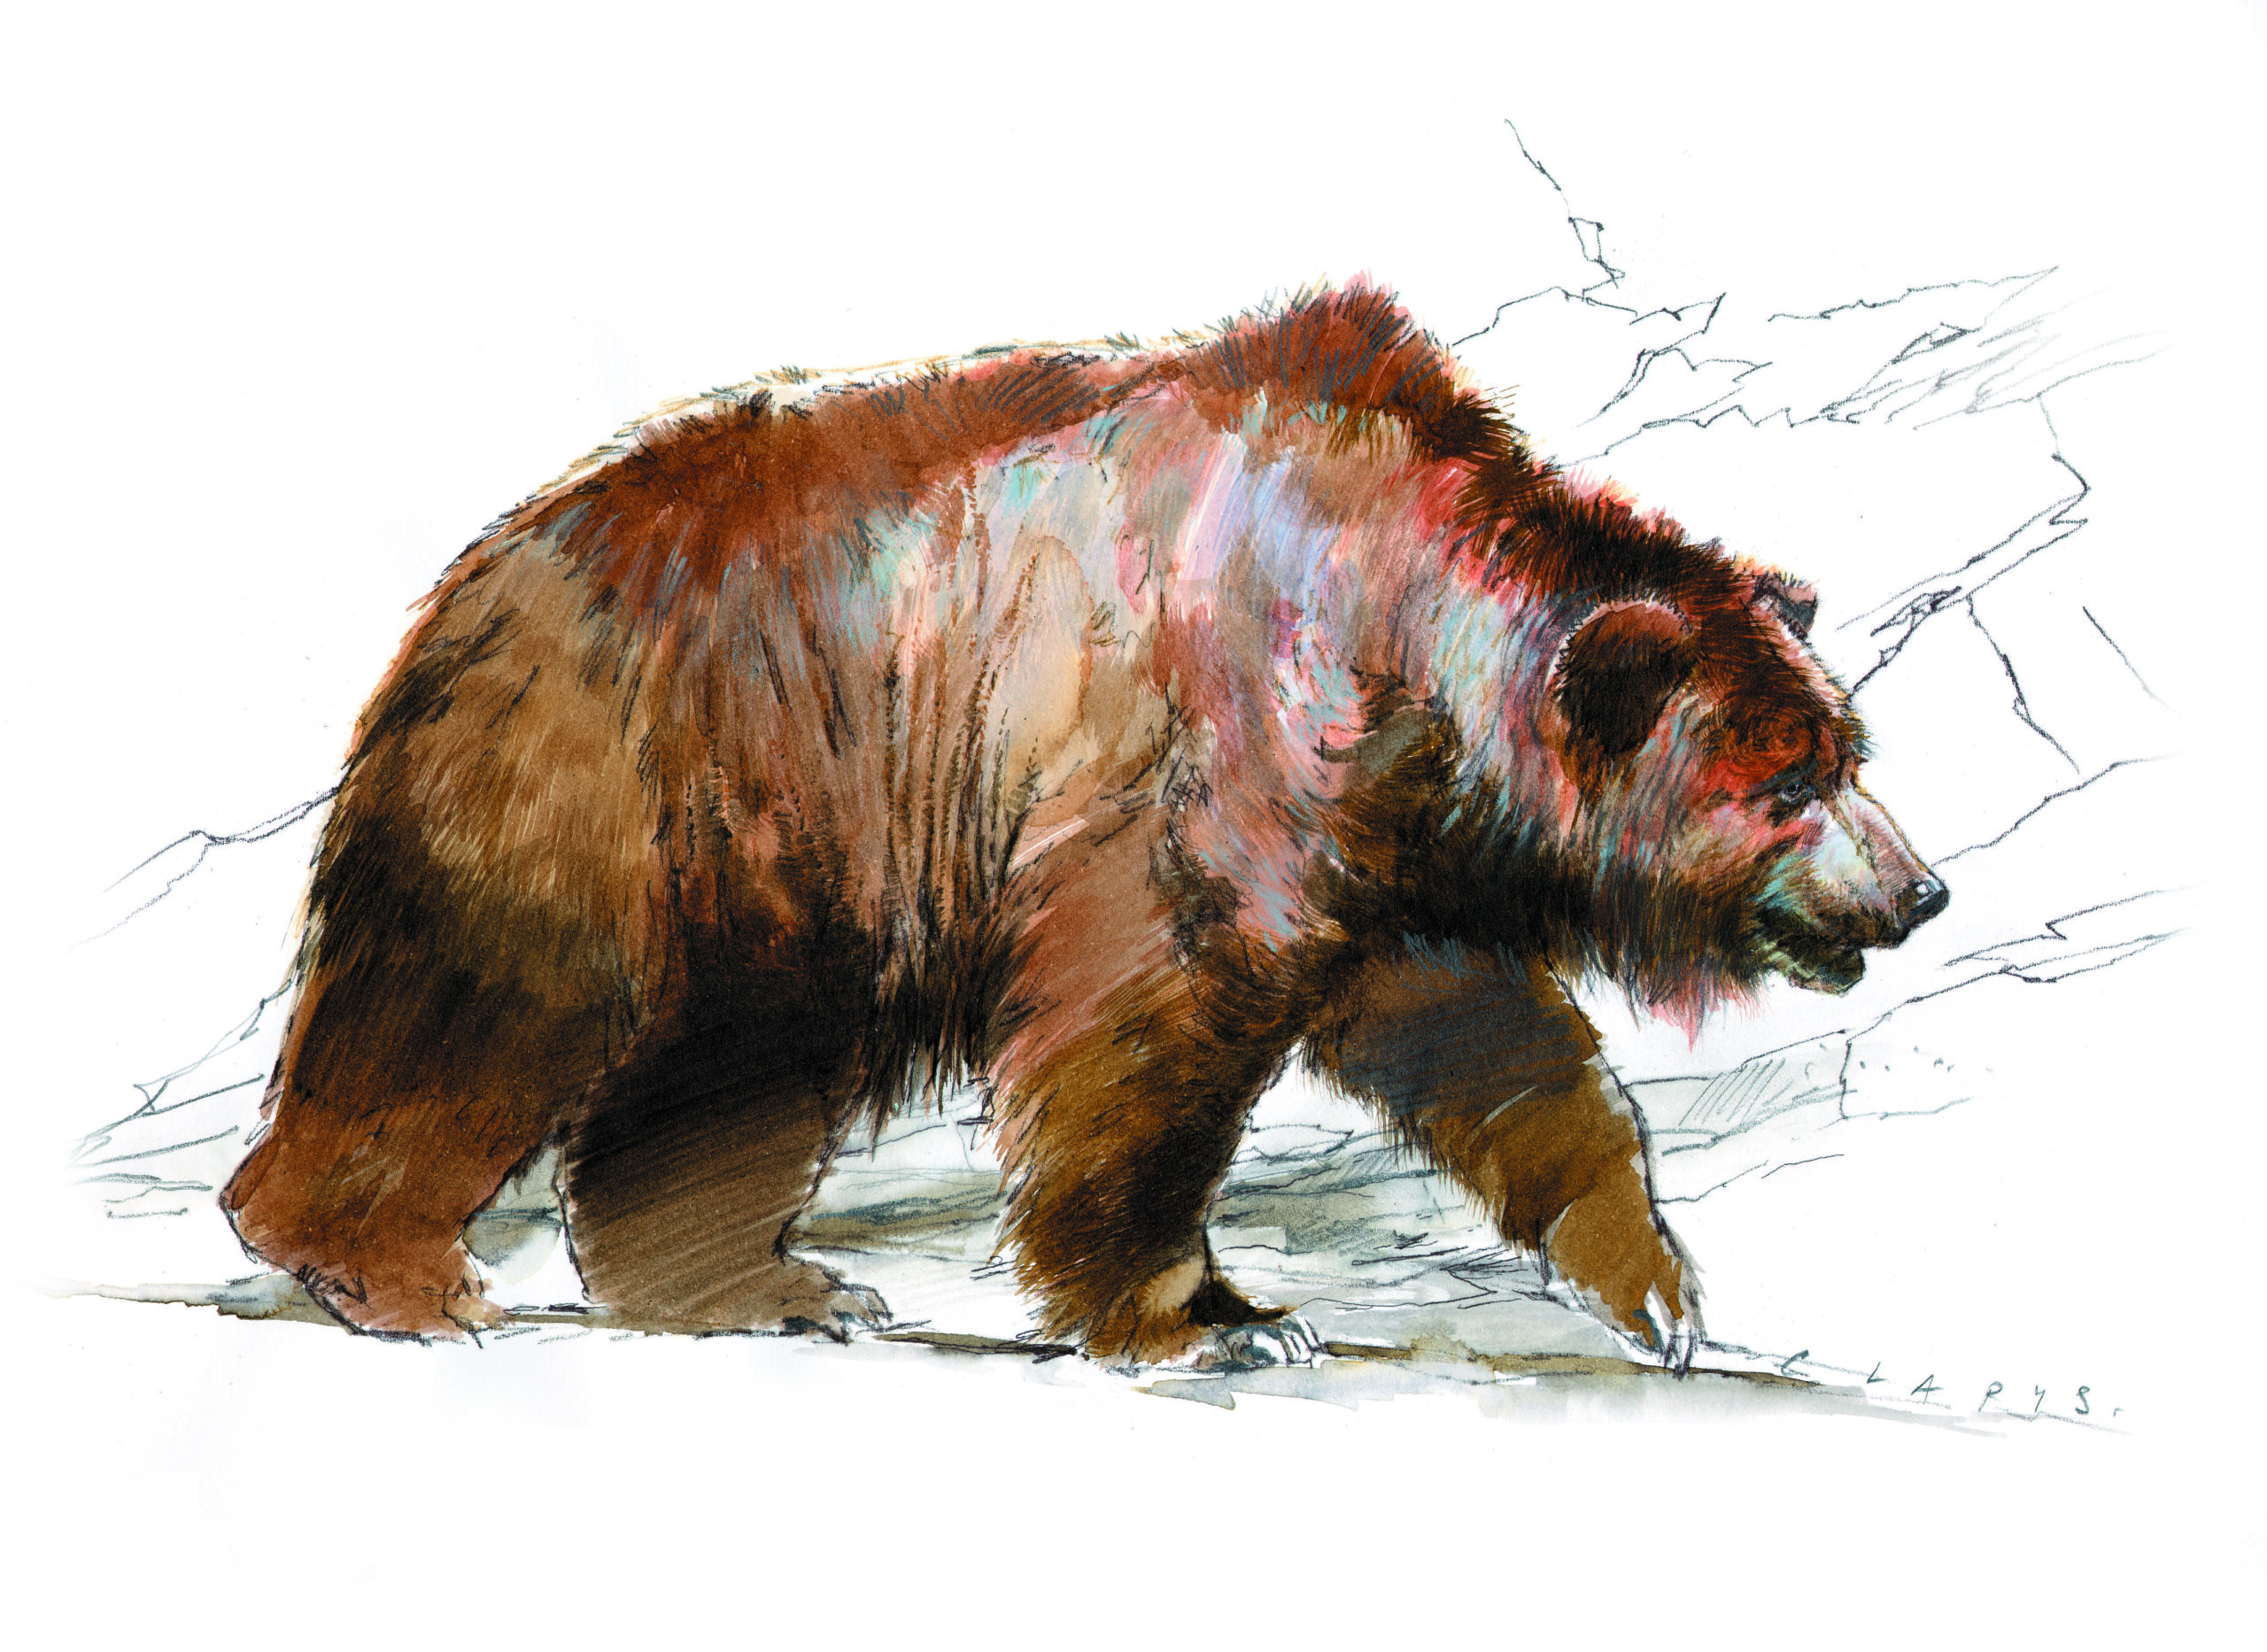 Humans have been using bear skins for at least 300,000 years Schöningen